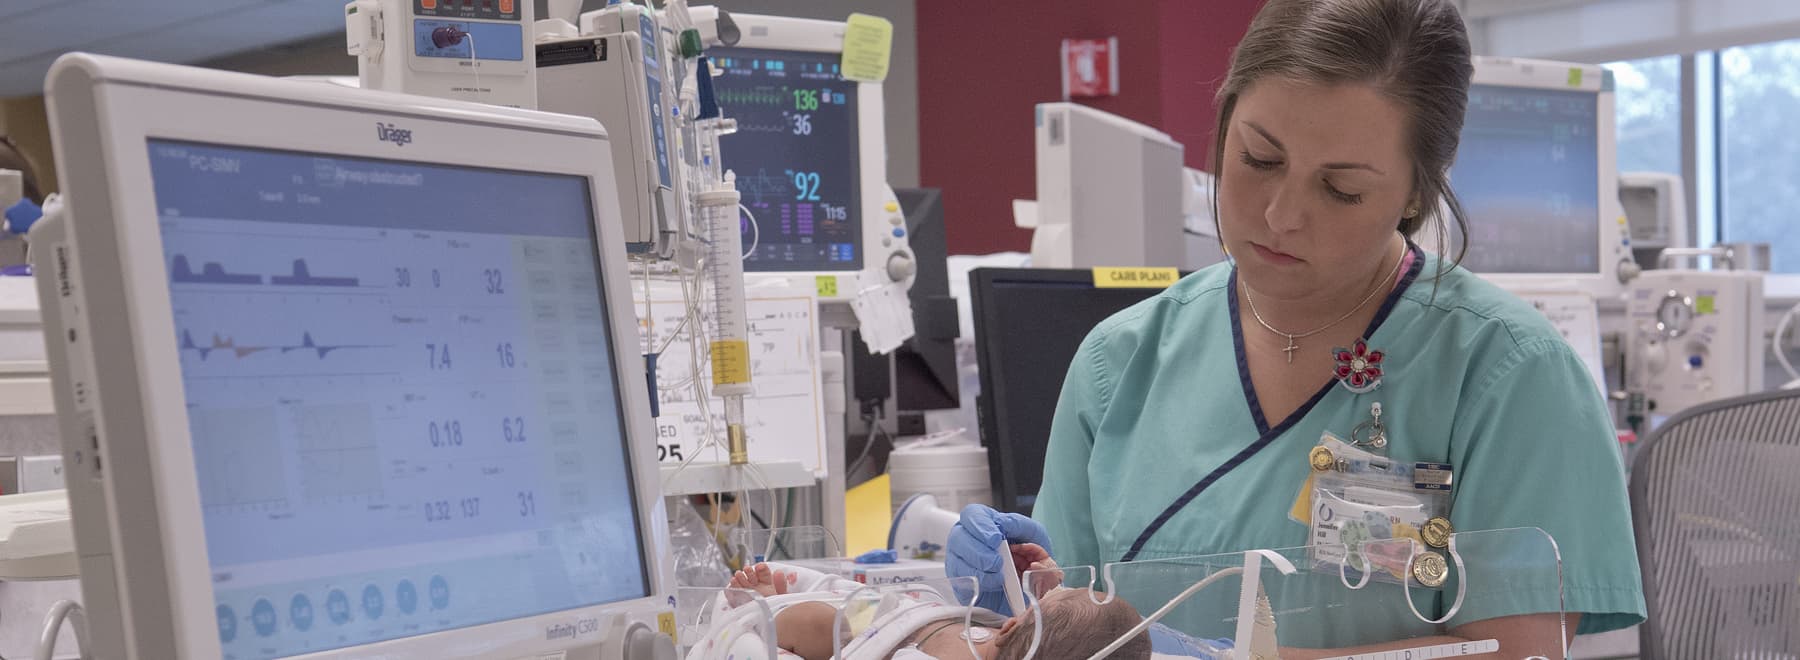 NICU nurse tending to newborn patient. Vital signs monitor is to the left.